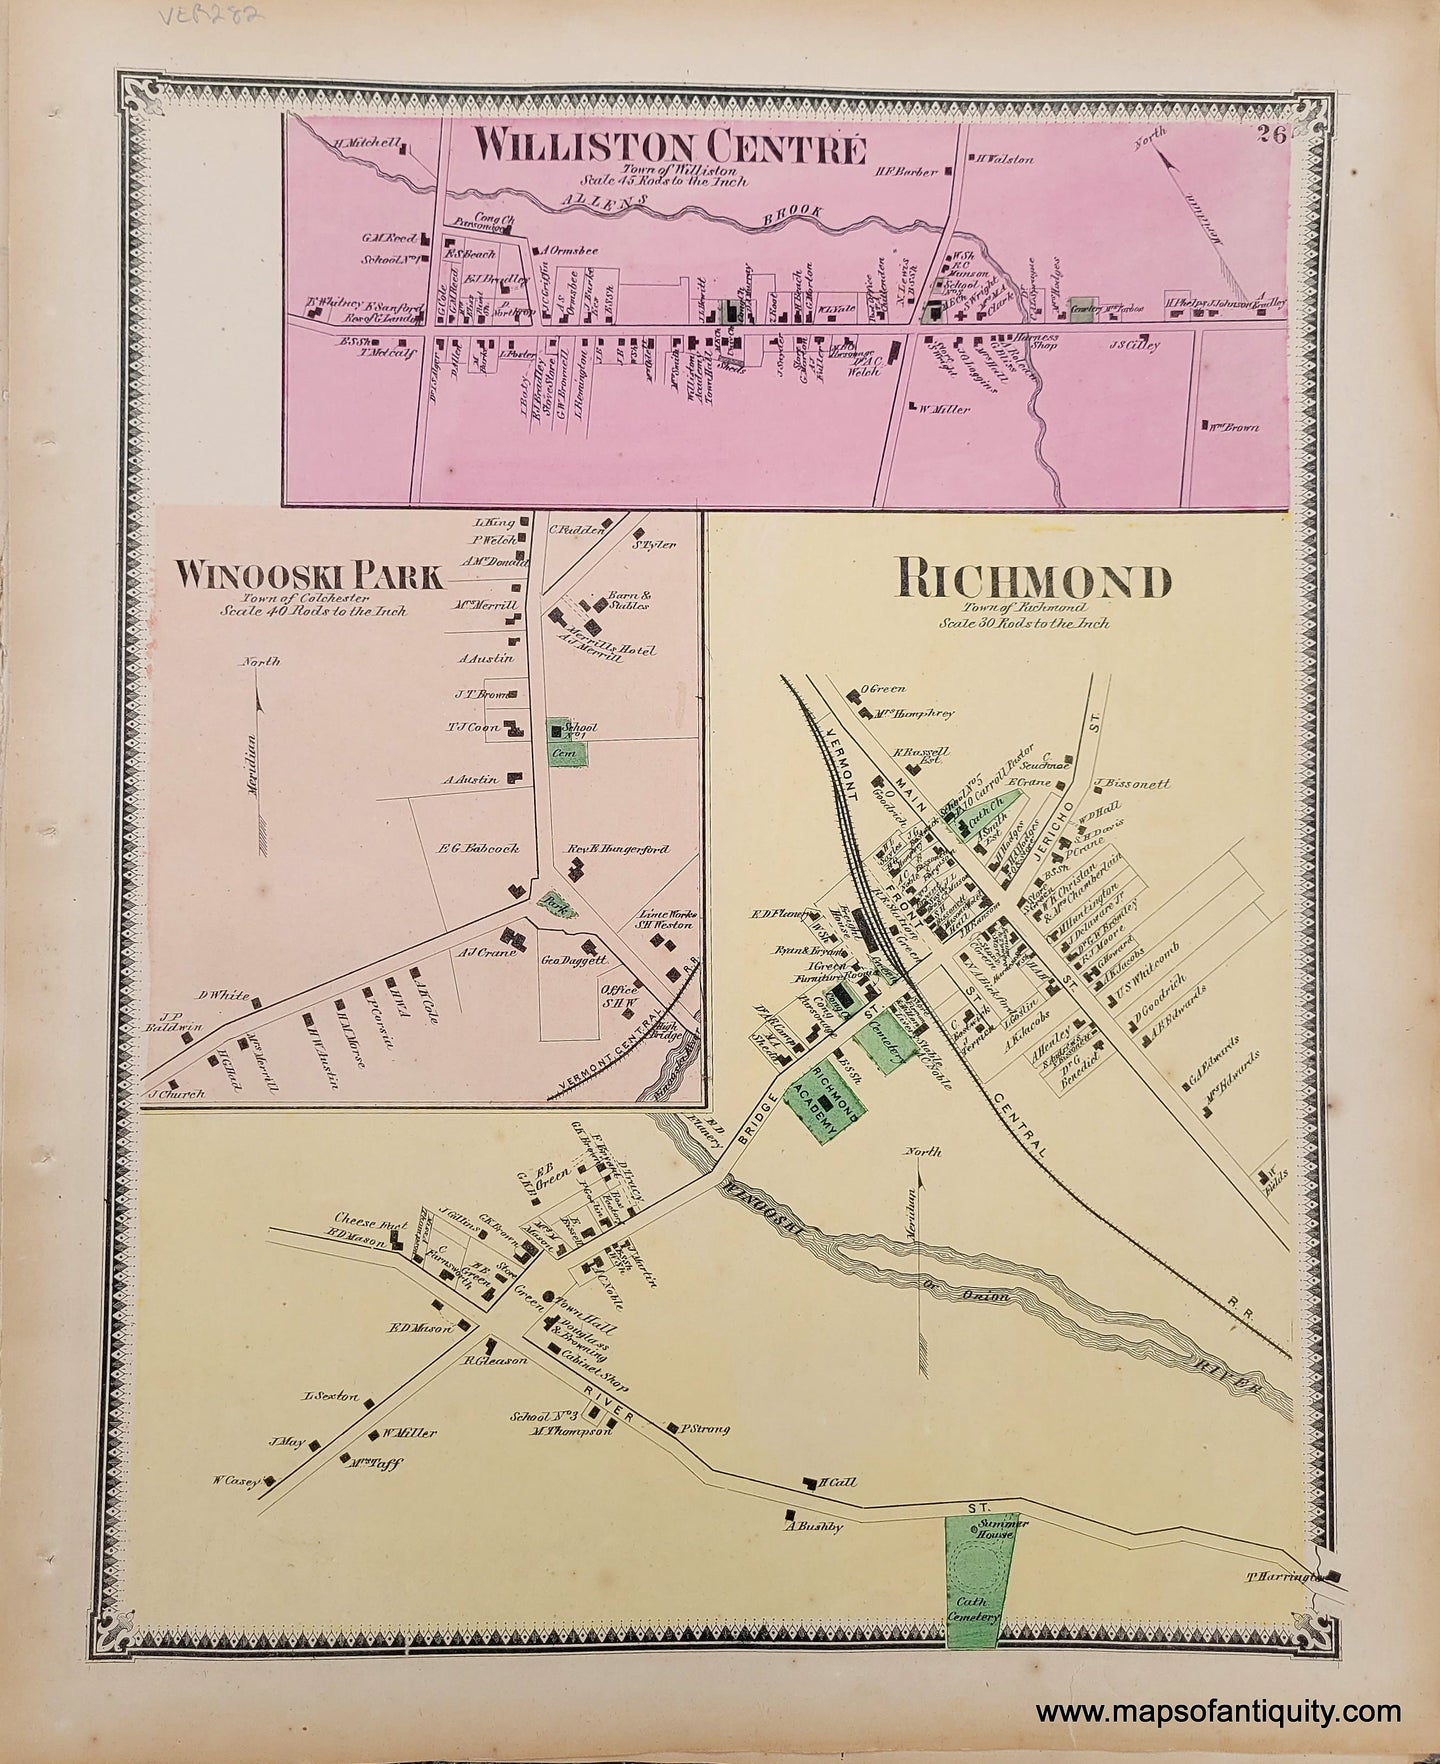 Genuine-Antique-Hand-colored-Map-Williston-Centre-Winooski-Park-and-Richmond-VT--1869-Beers-Ellis-Soule-Maps-Of-Antiquity